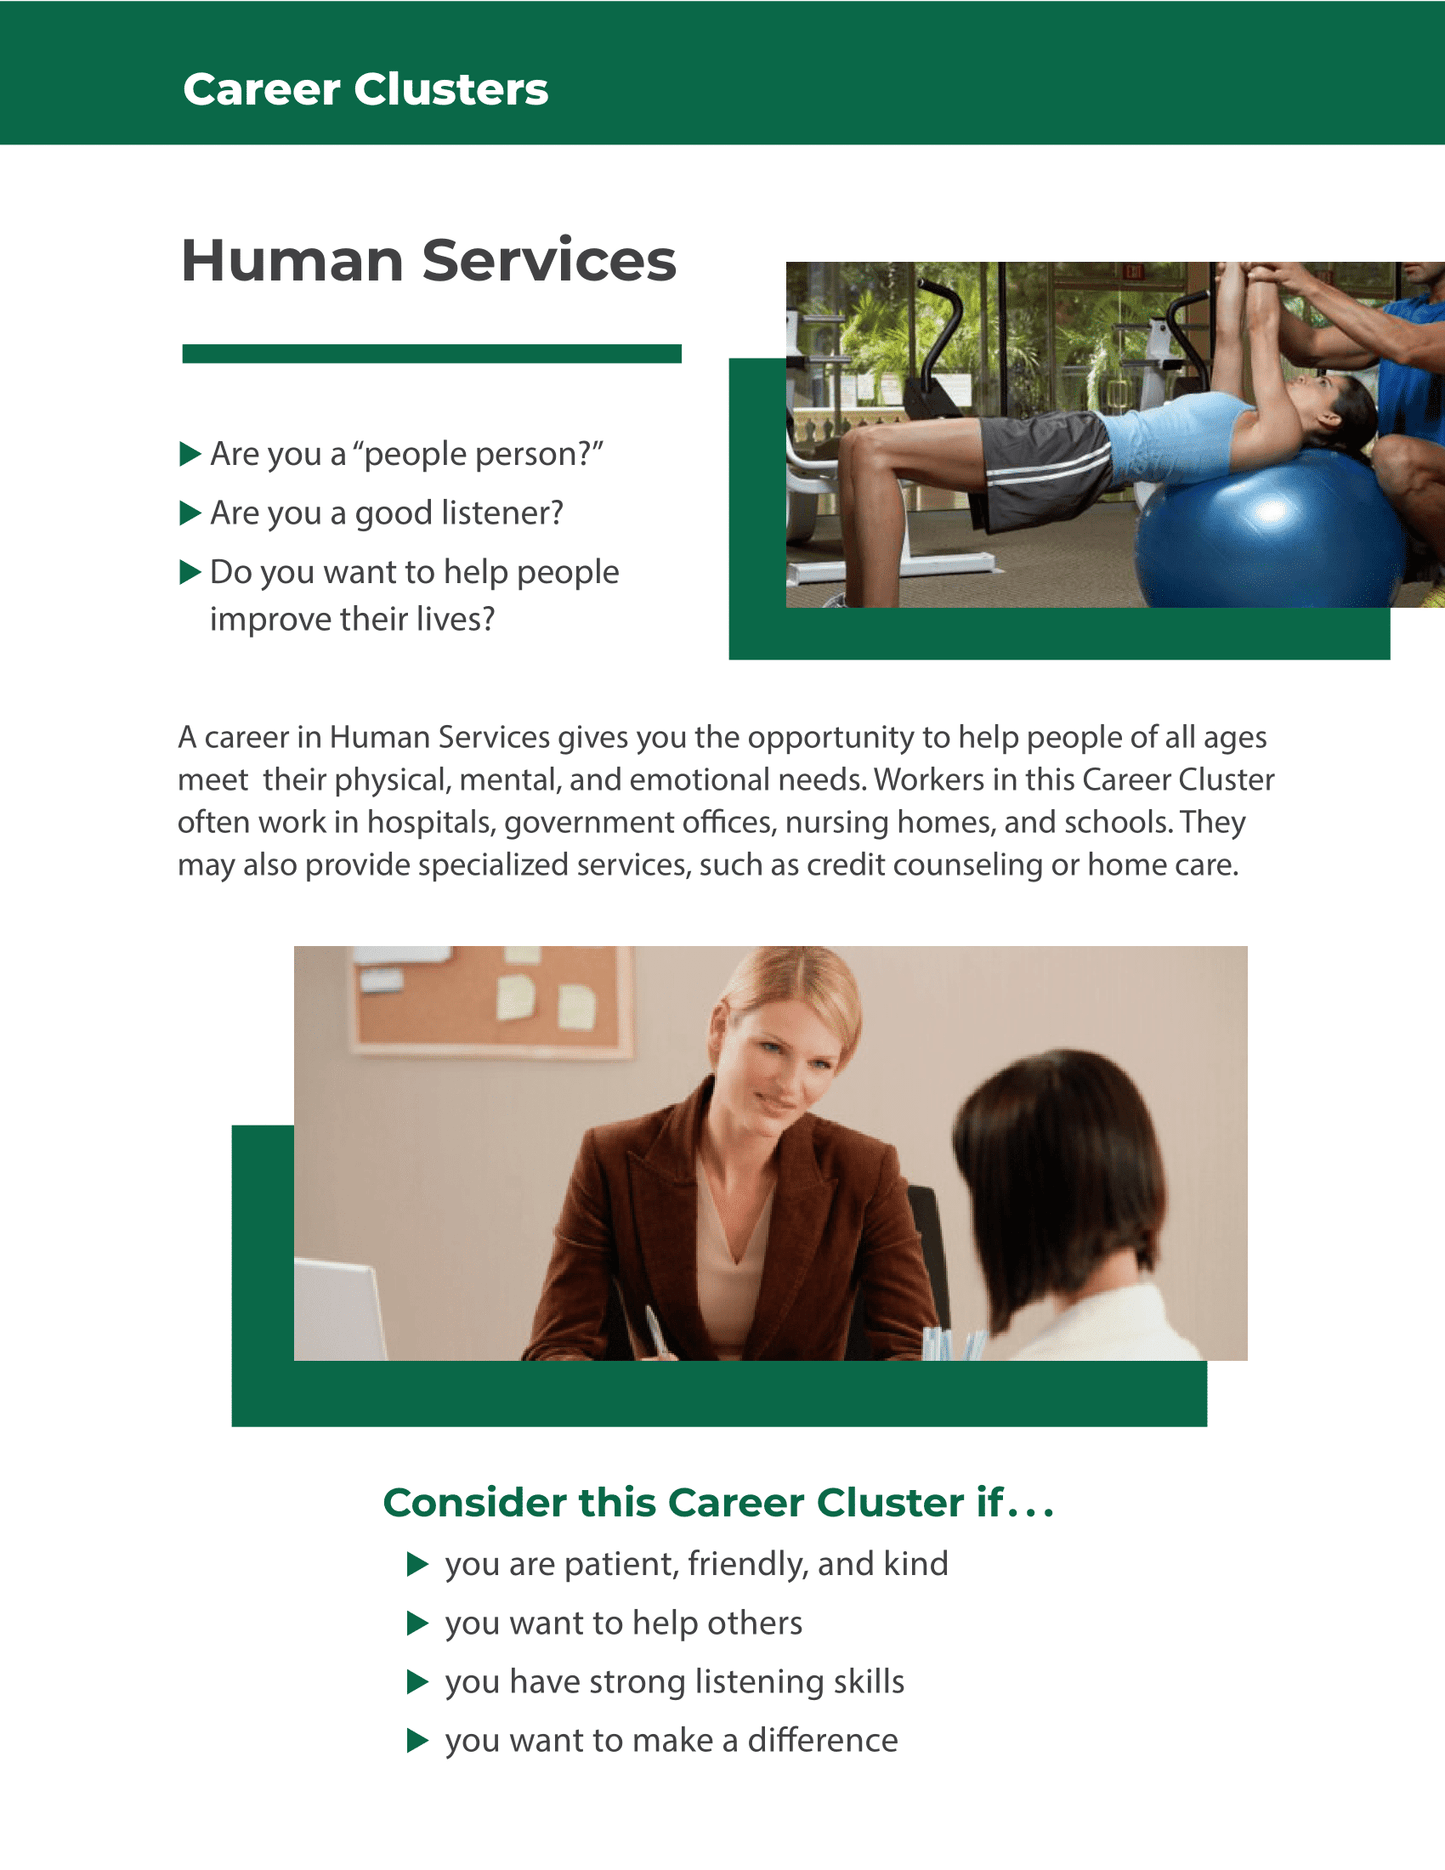 Career Clusters - Human Services